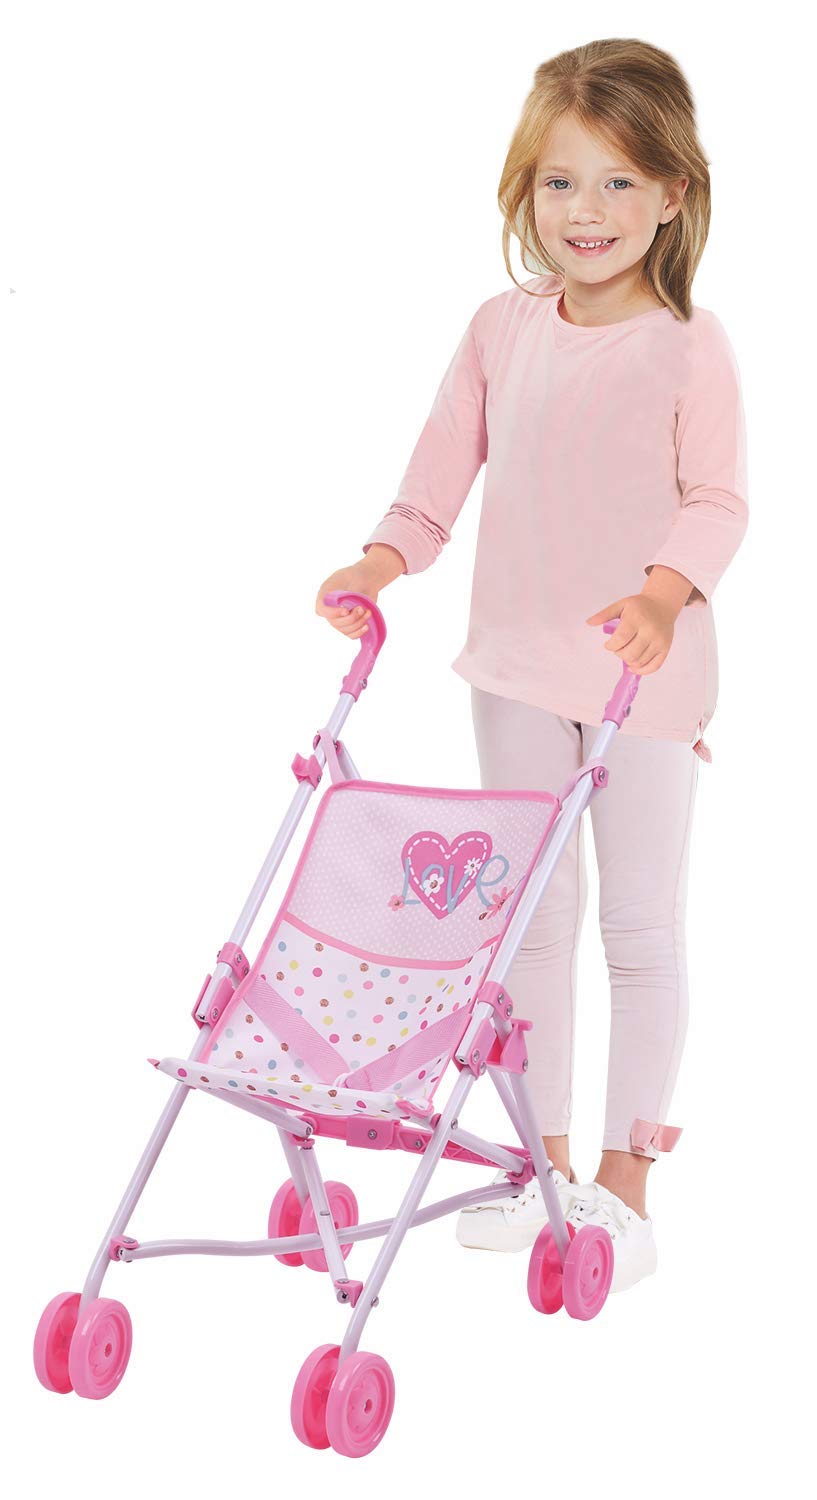 Hauck Love Heart Doll Umbrella Play Stroller, Carry Baby Doll or a Favorite -Stuffed Animal Friend, Toy Fits Dolls Up to 18 inches, Great Gift for Push Around Caring Play, Kids Ages 3 and Up